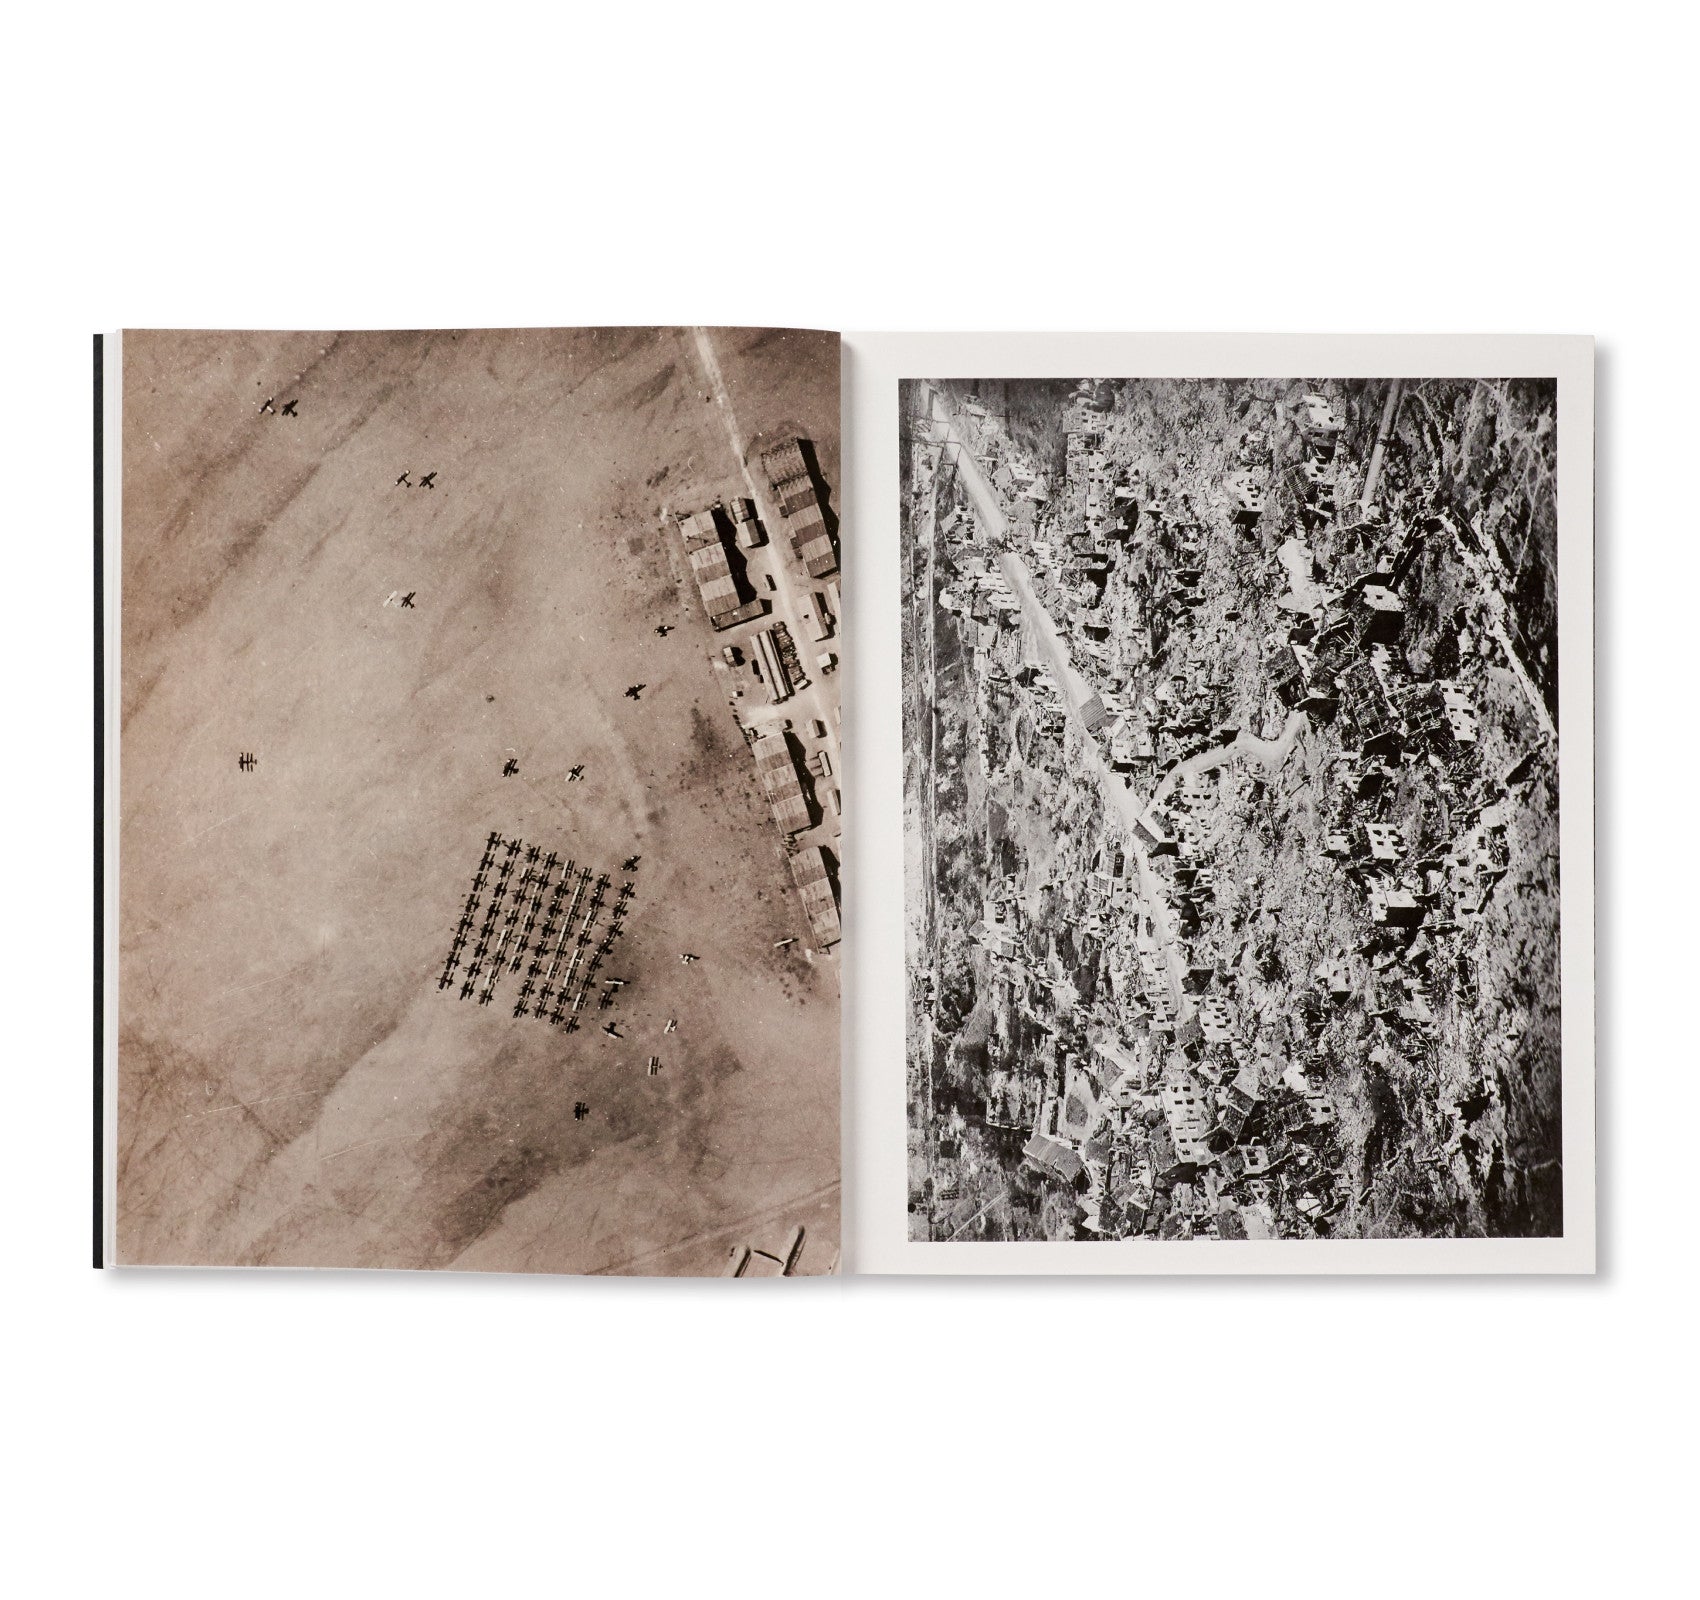 A HANDFUL OF DUST by David Campany [SECOND EDITION]